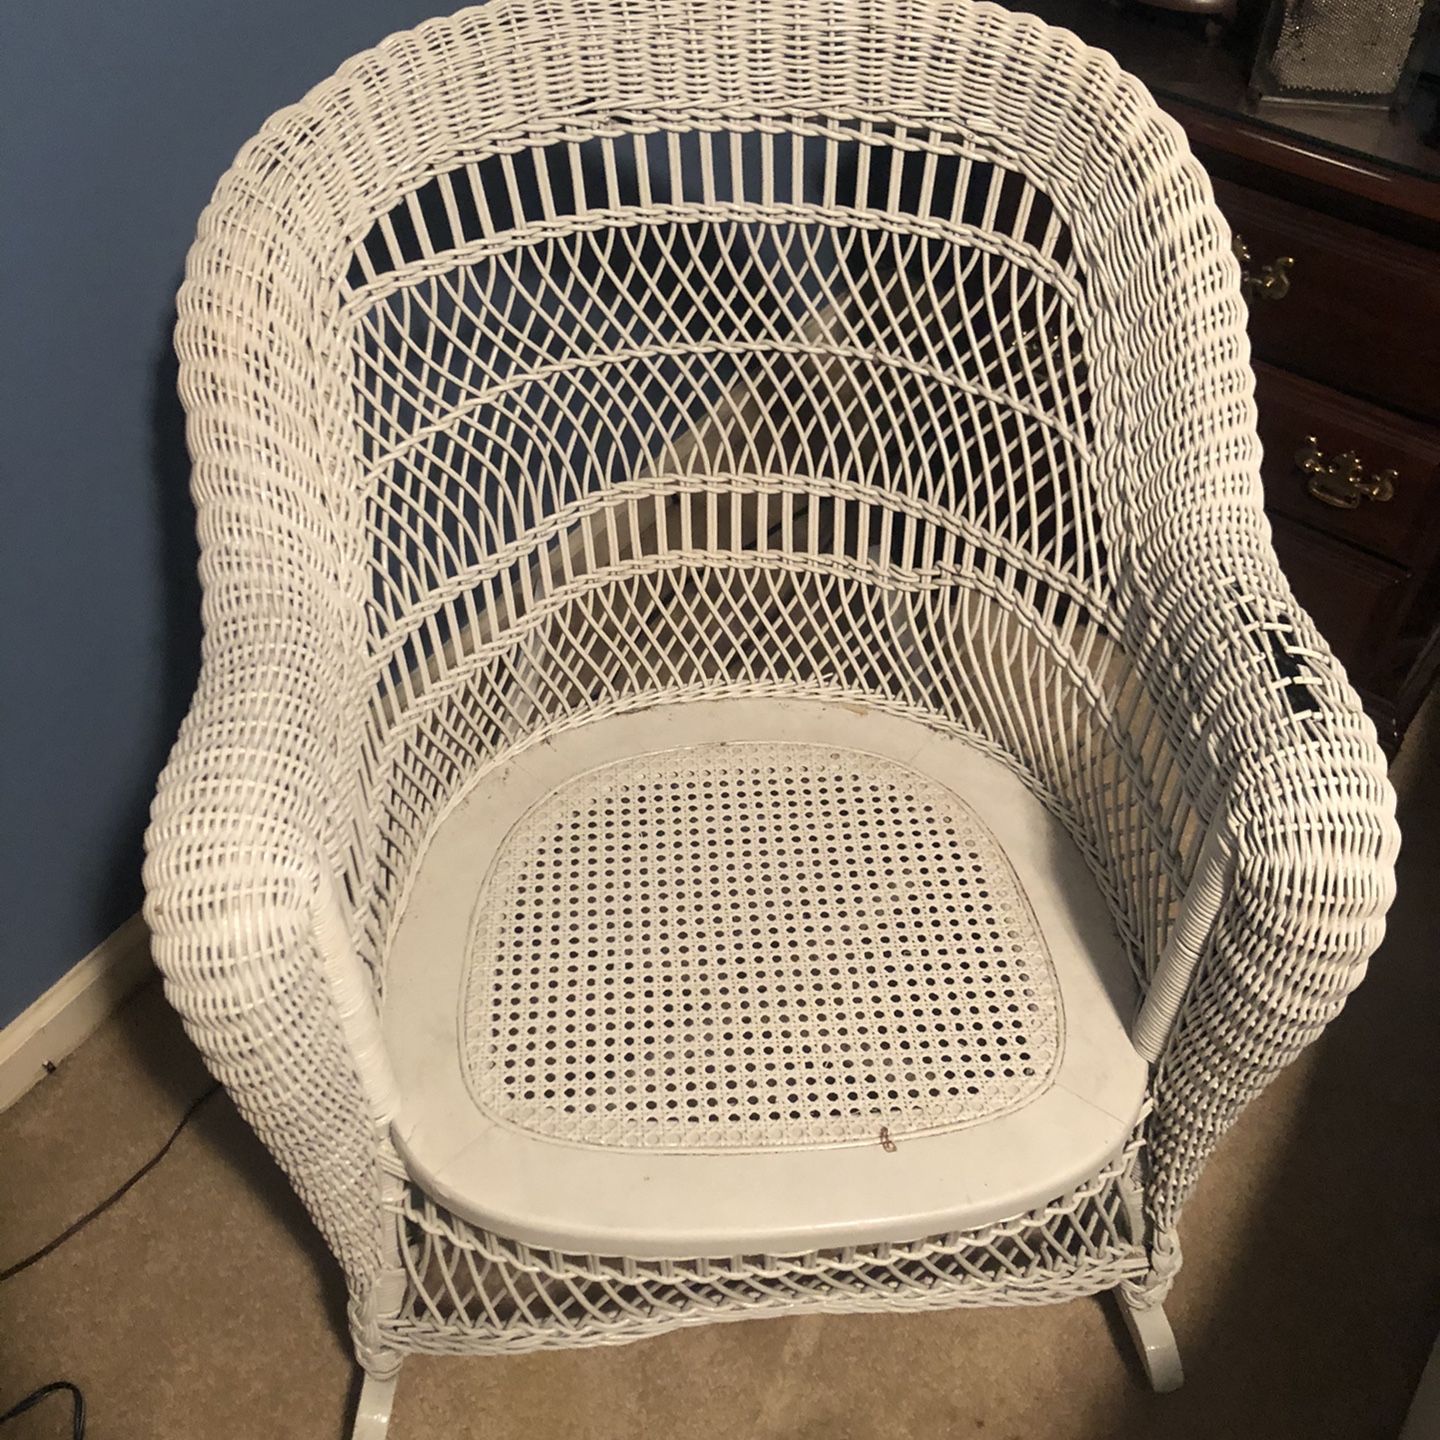 White Wicker Rocking Chair with Intricate Design